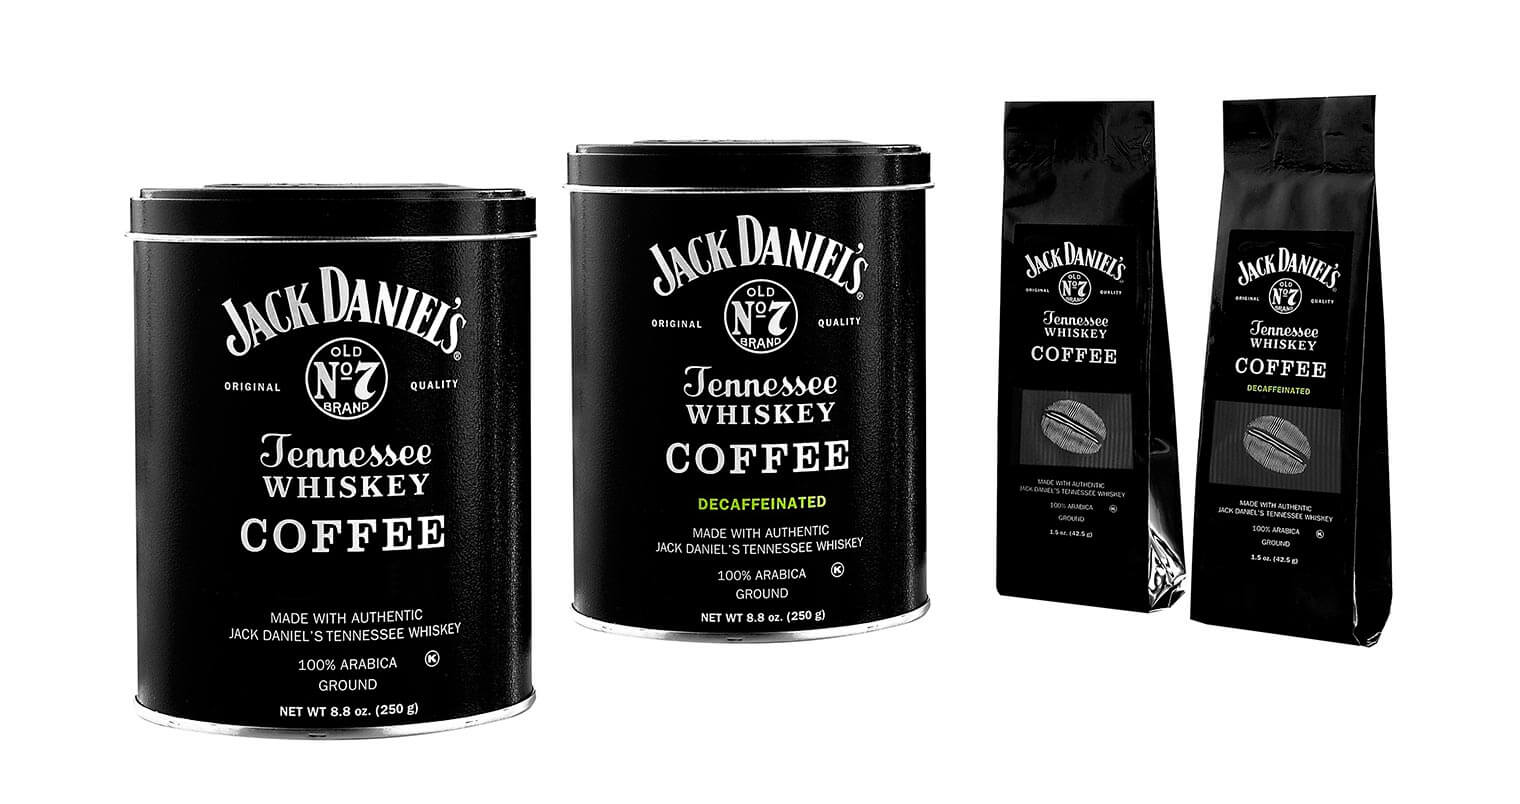 Jack Daniel’s Launches Tennessee Whiskey Coffee, featured image